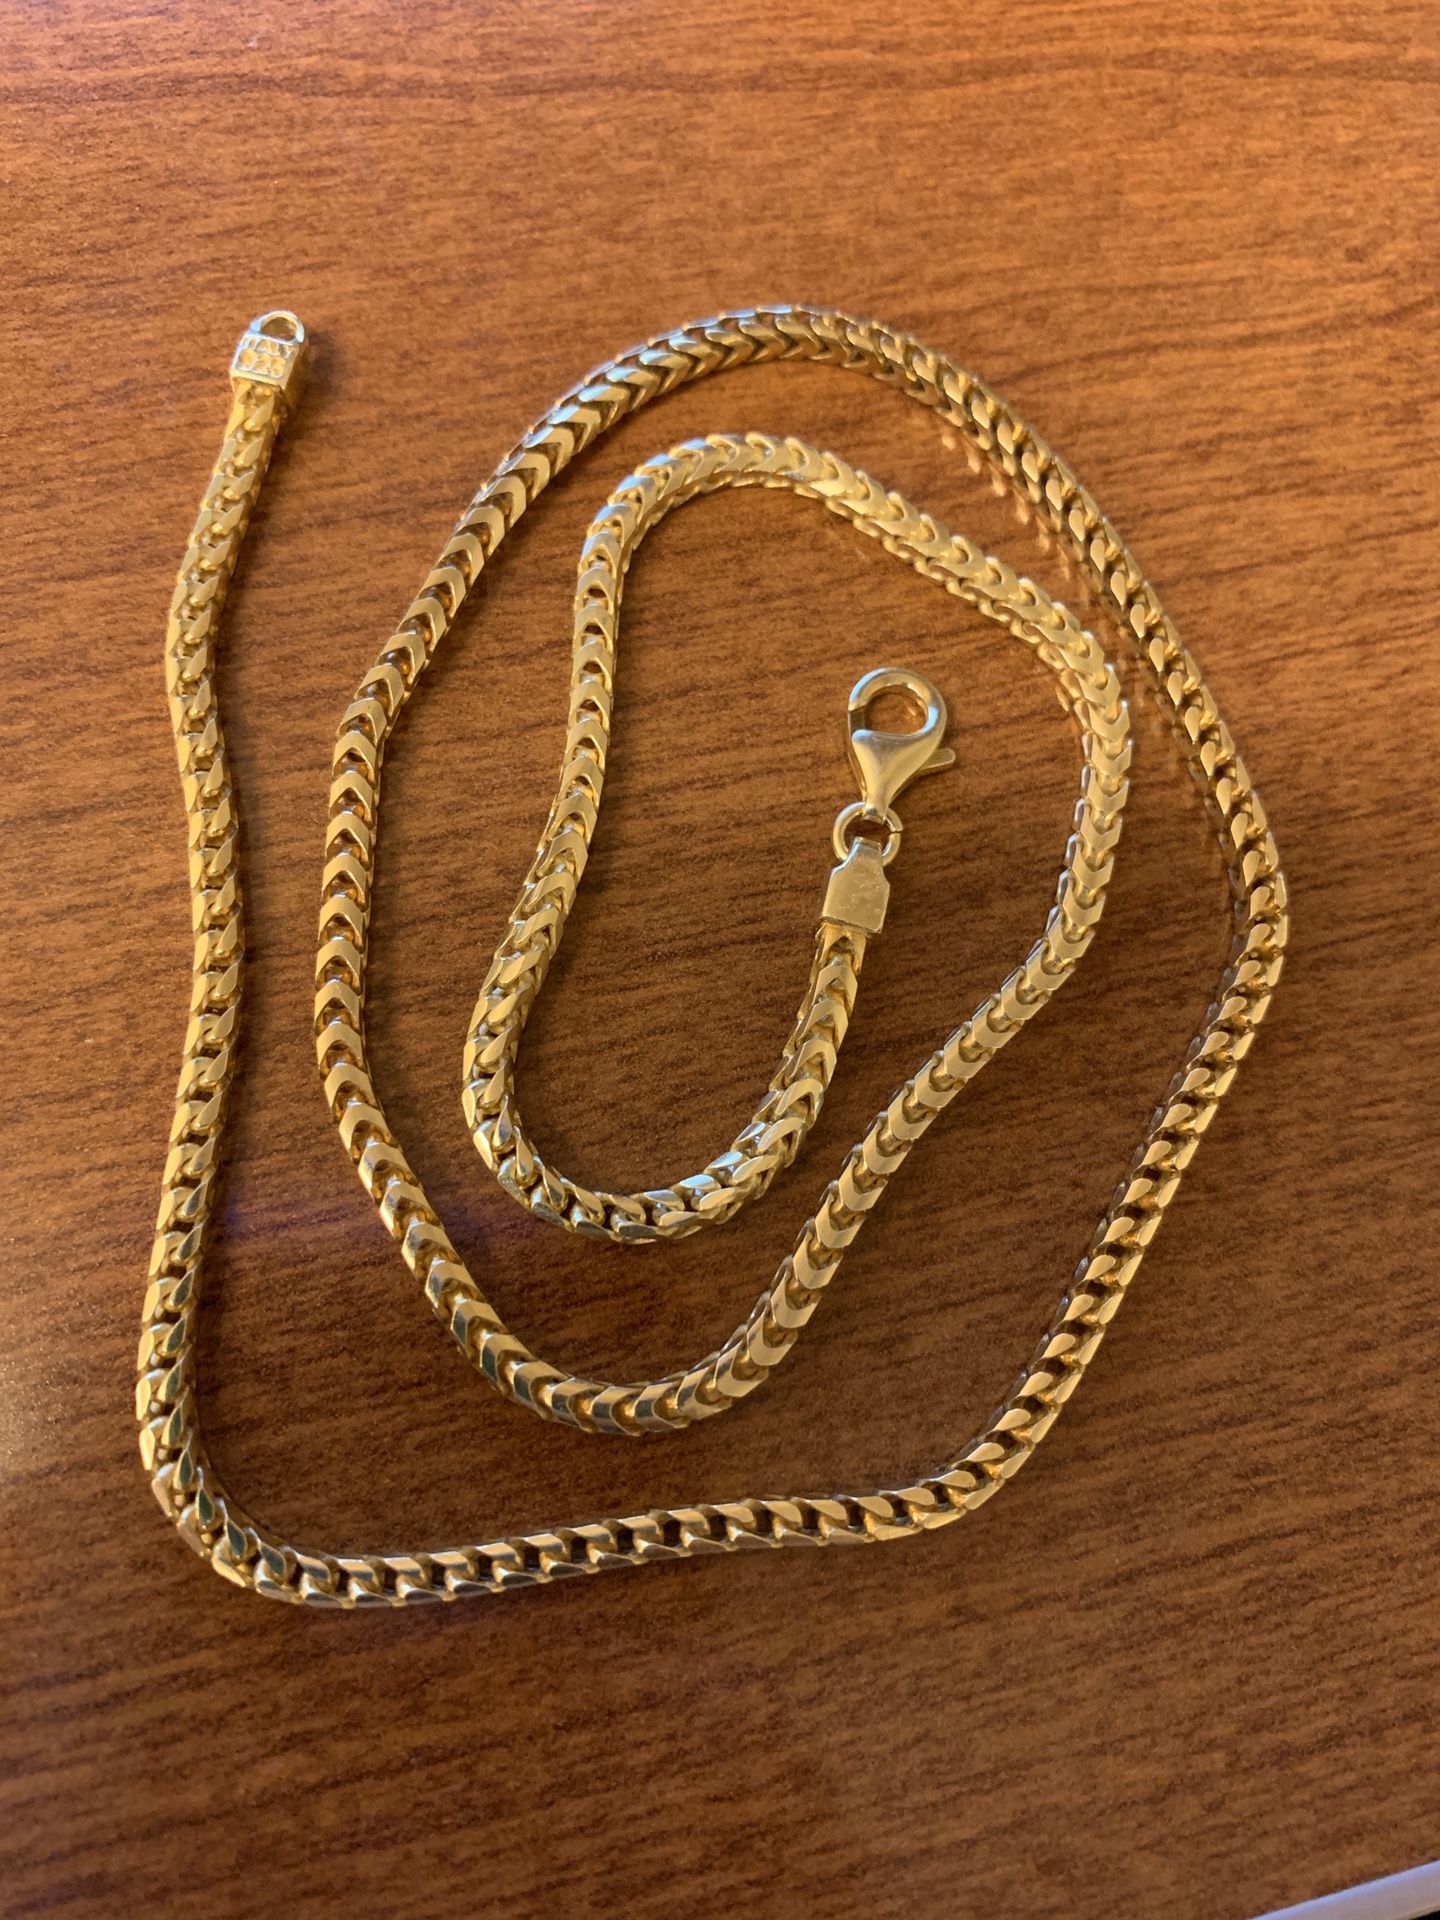 Gold Franco Chain - 3 mm 22 in